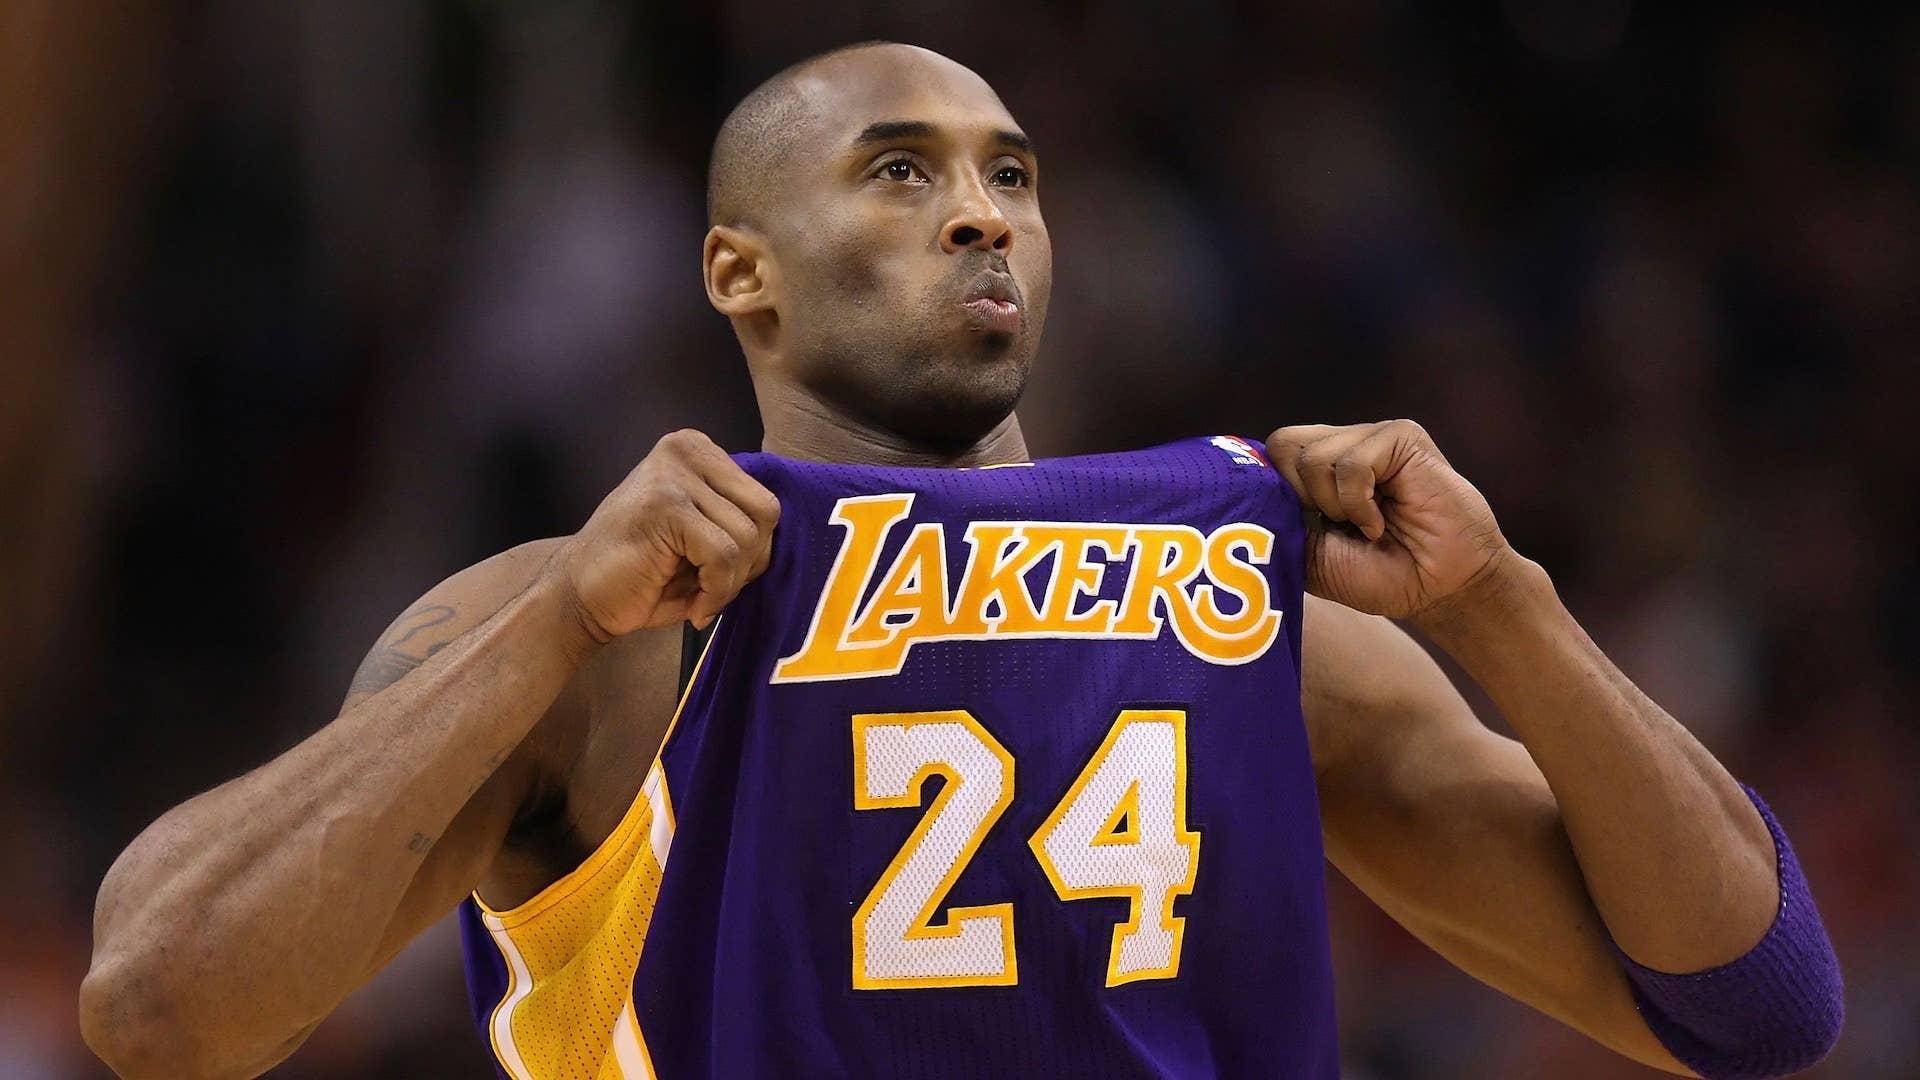 Kobe Bryant is inducted into basketball Hall of Fame - Good